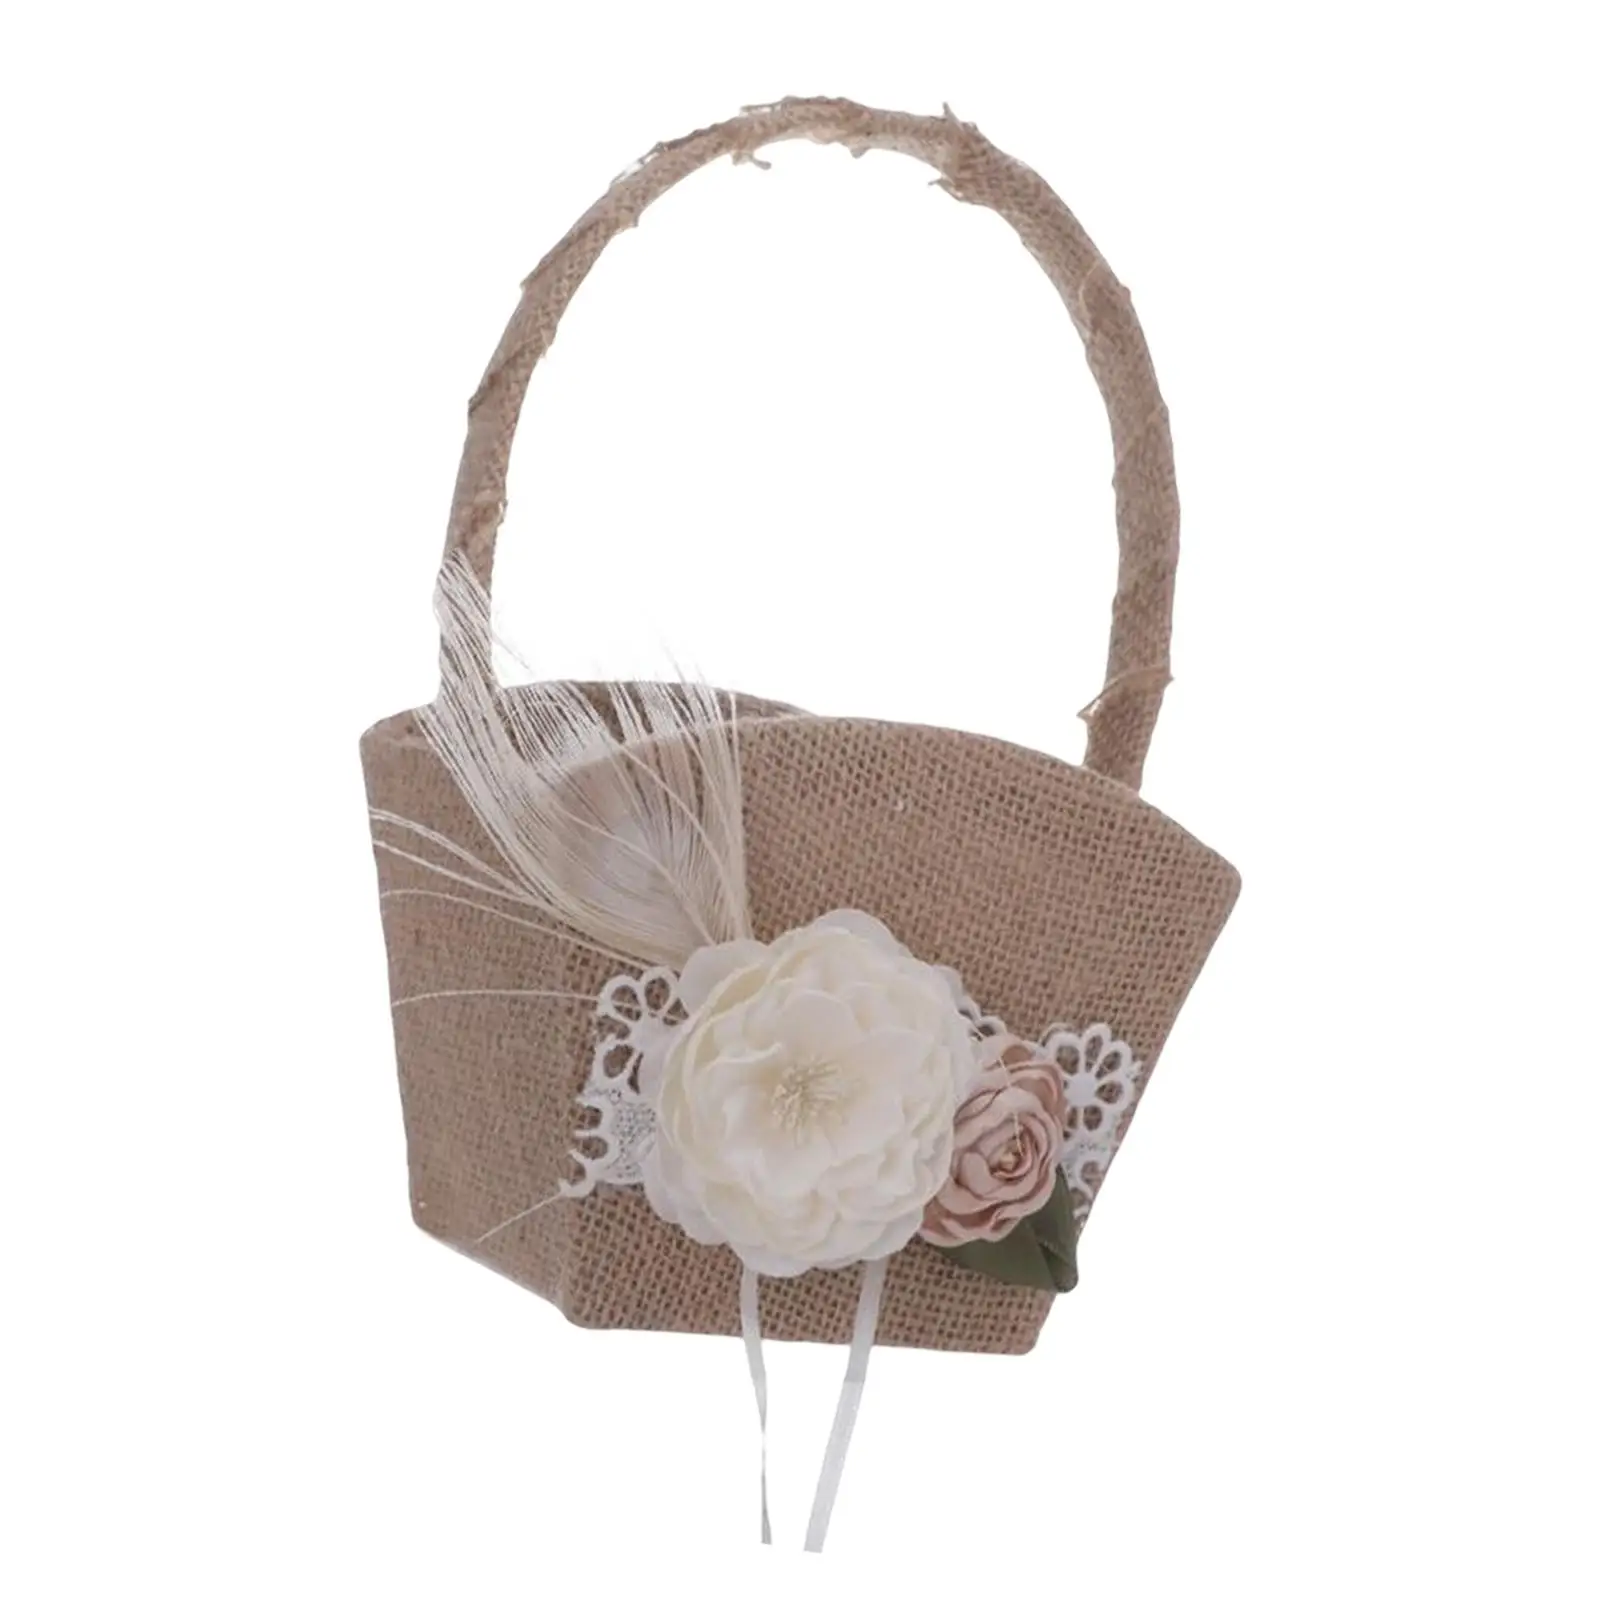 Multi Use Flower Girl Basket Accessory Rose Shaped Decor Celebration Rustic Candy Gift Basket Lace Satin Burlap for Home Parties